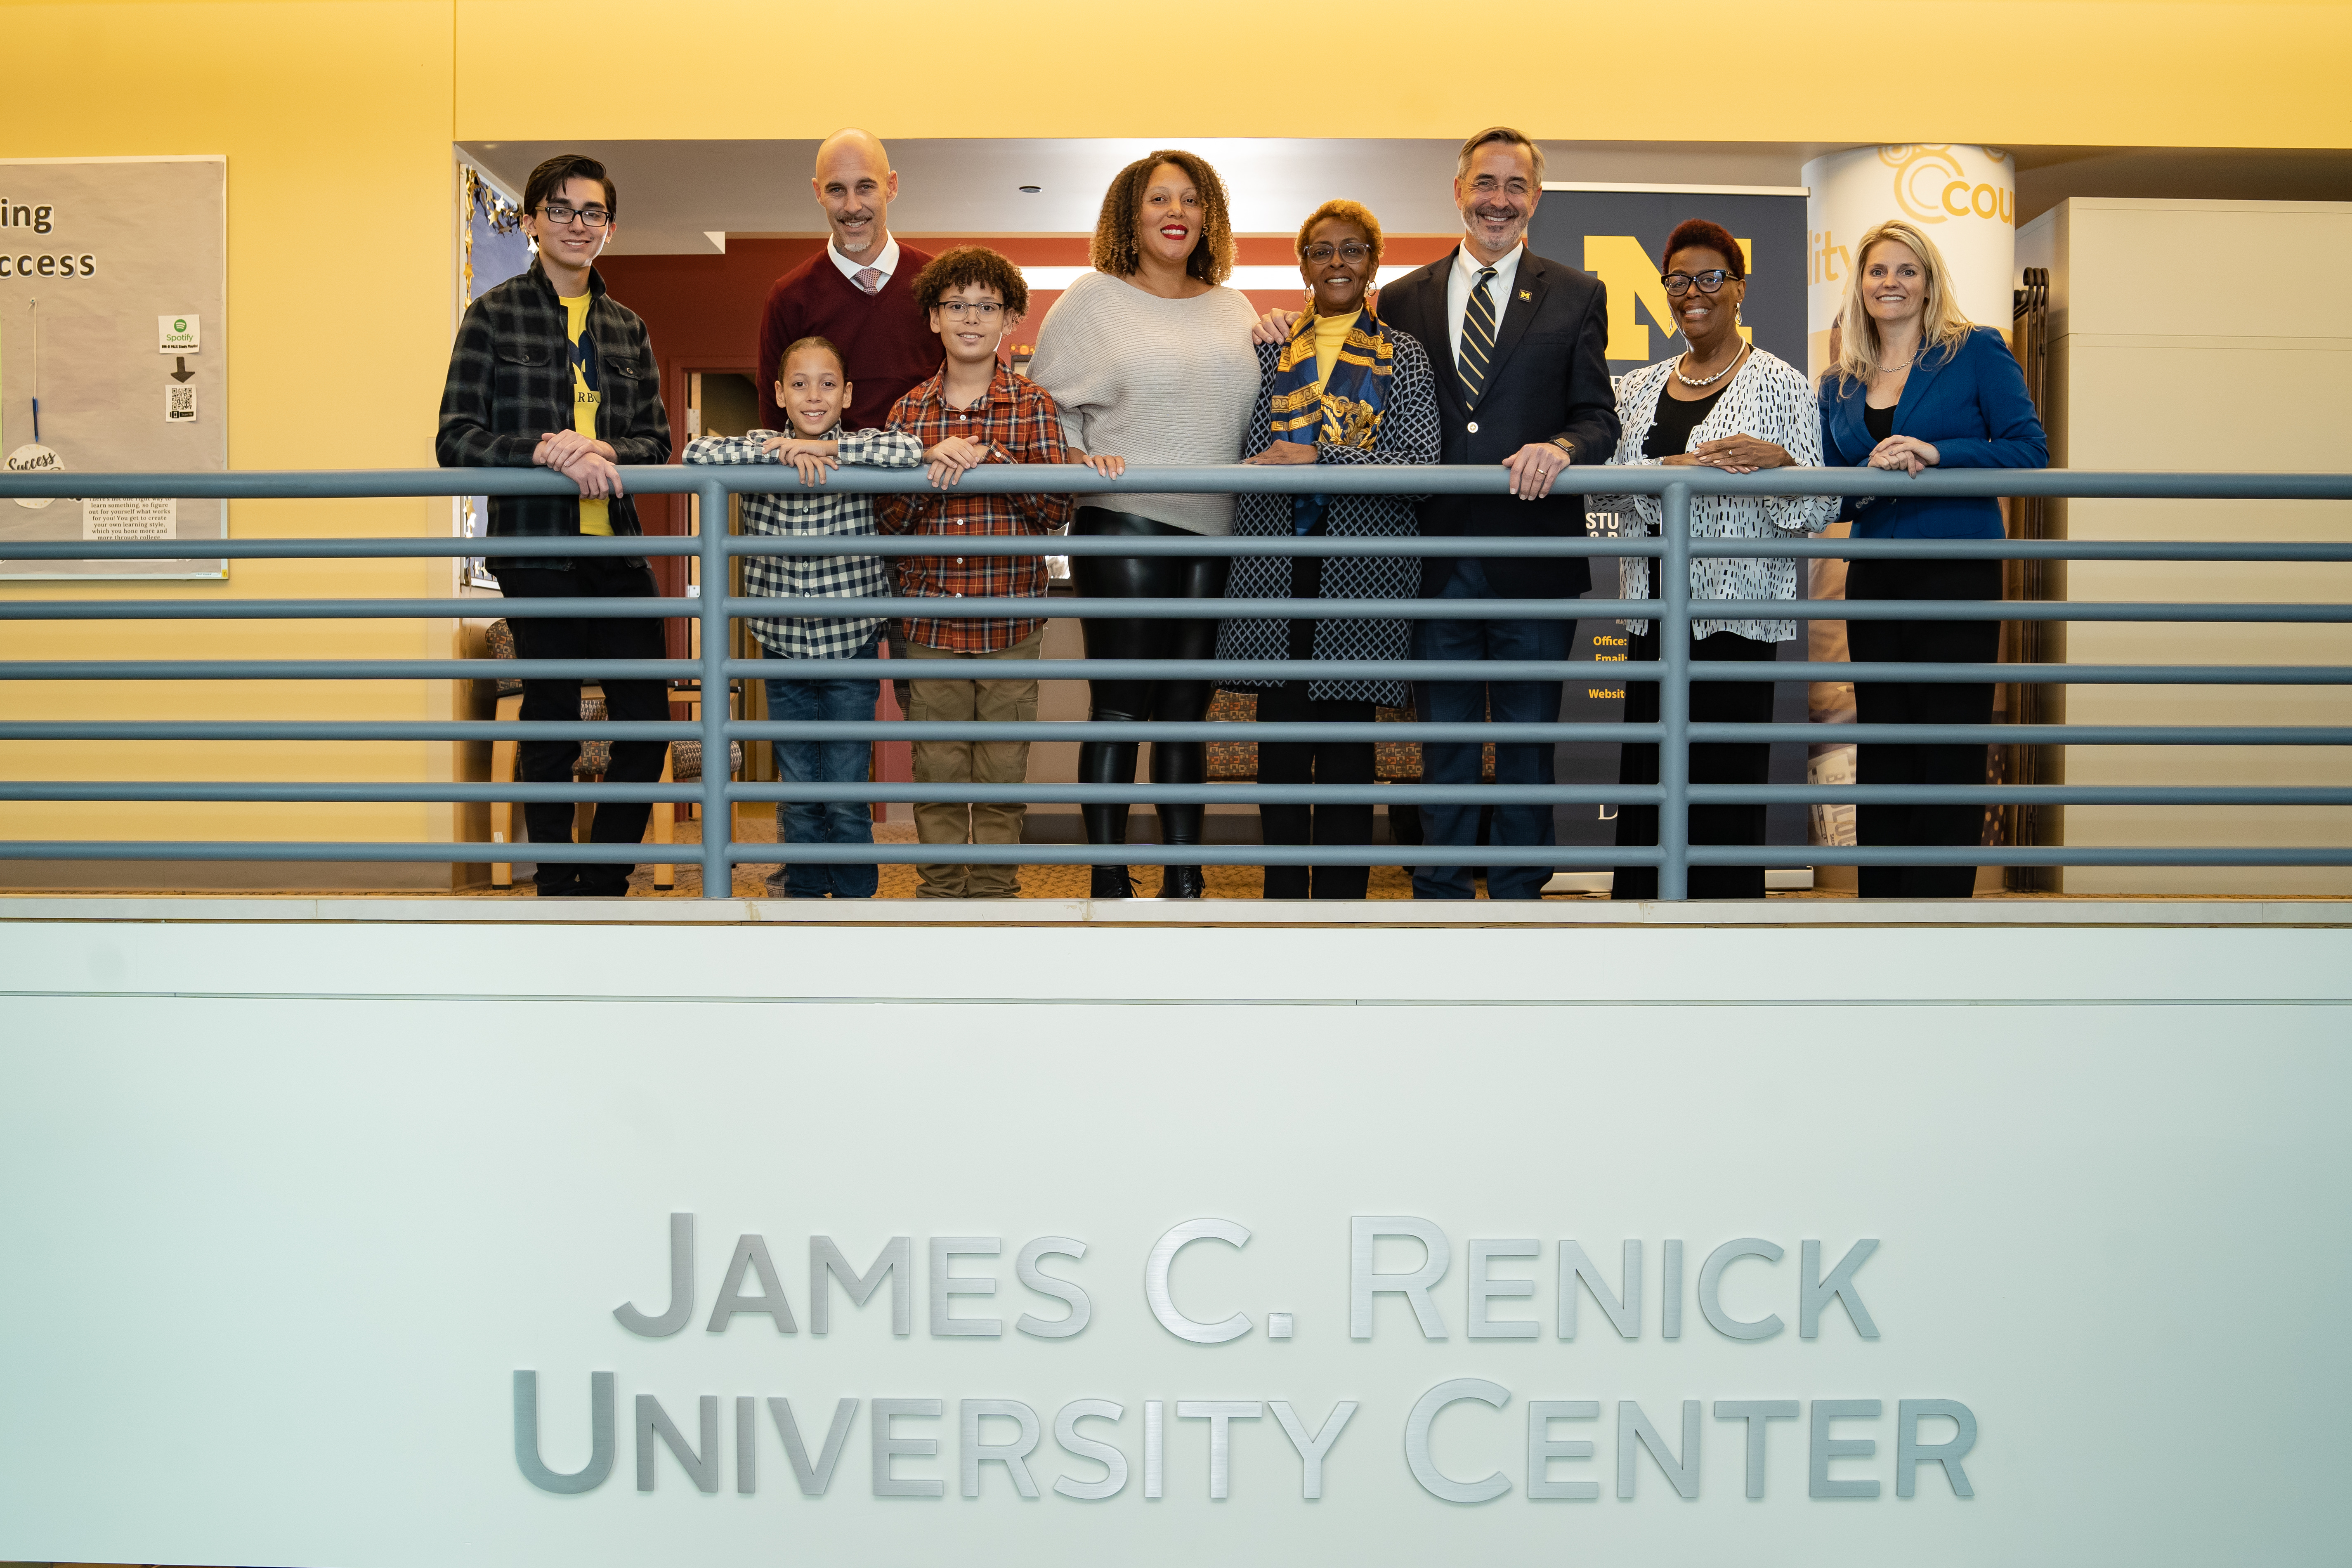 Photo of the new sign in the Renick UC, following the naming. The Renick family and administration are featured.